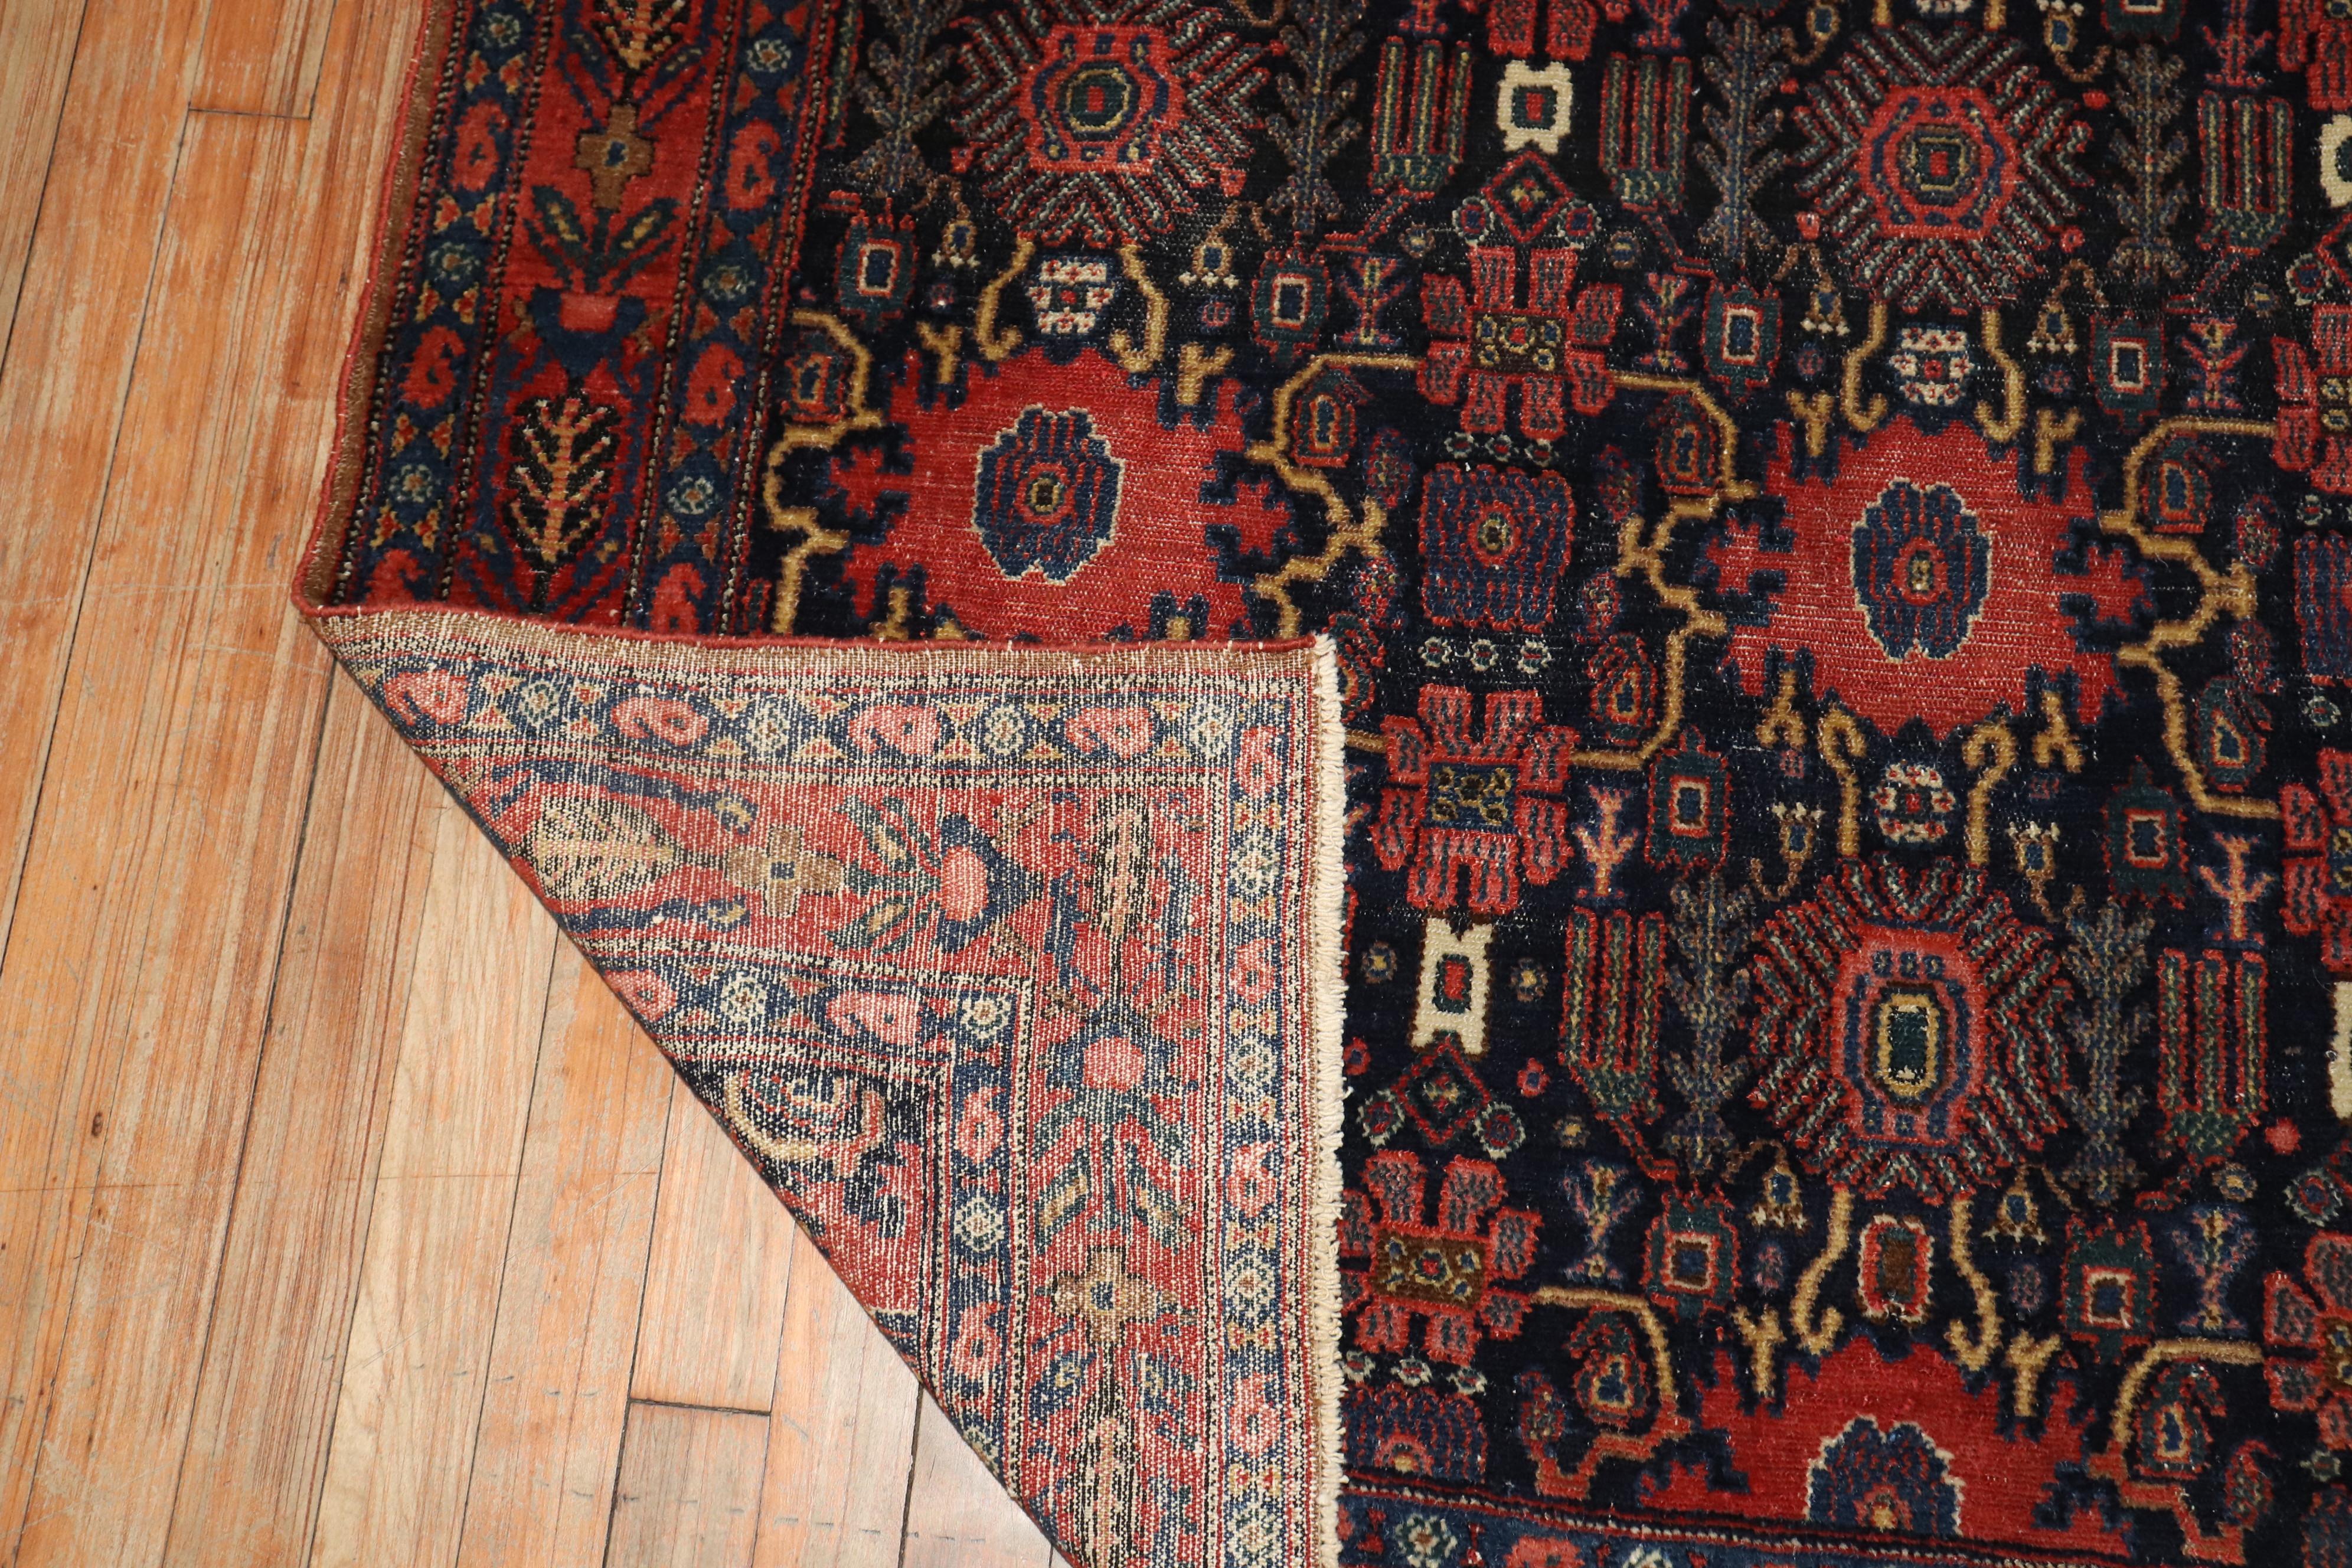 early 20th century Persian Senneh Accent Size Antique Rug

Details
rug no.	j3195
size	4' 6